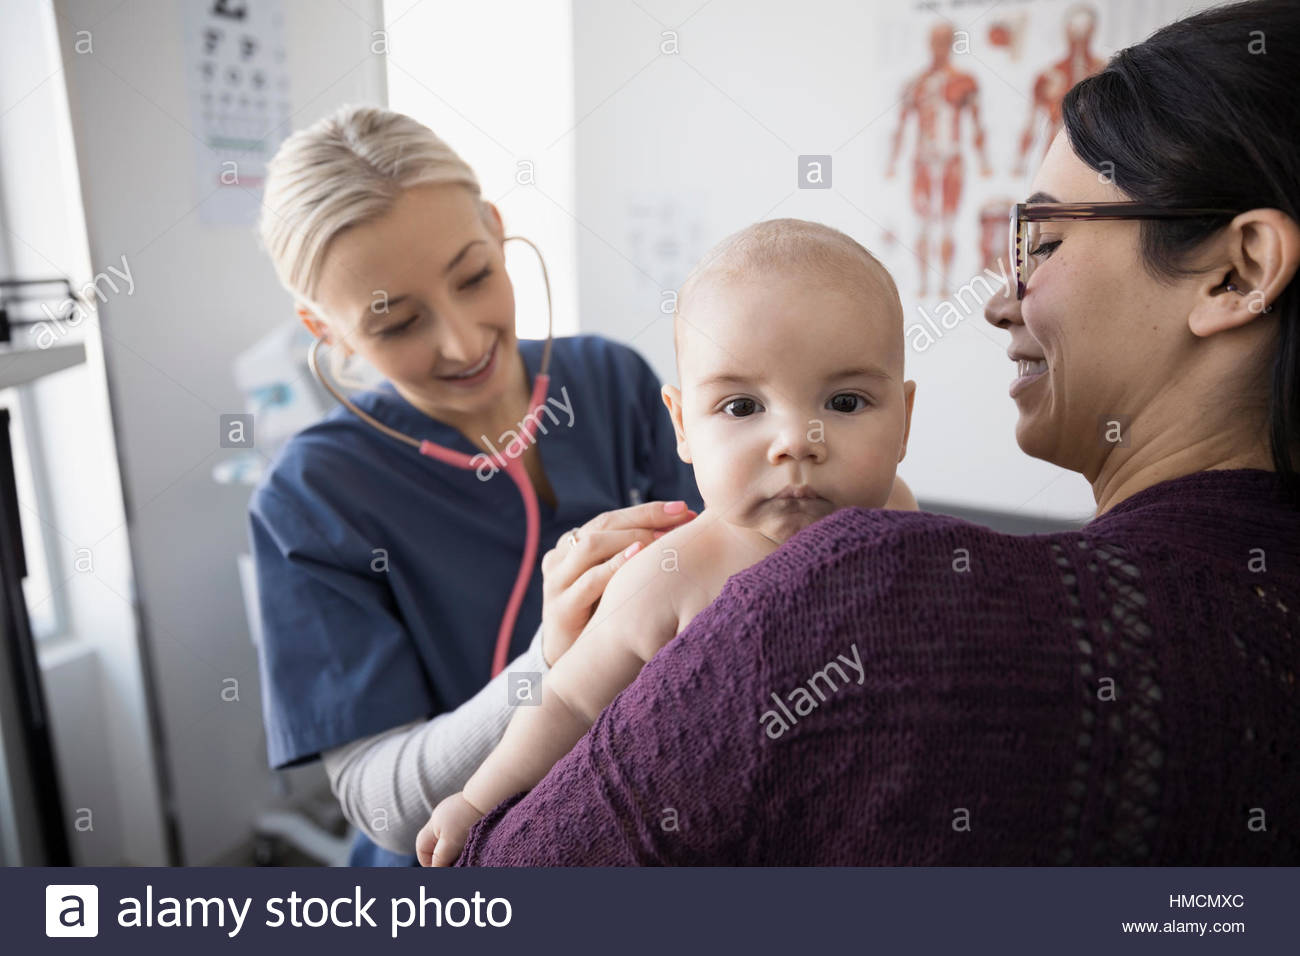 Portrait cute baby boy at checkup with mother and female nurse in medical examination room Stock Photo